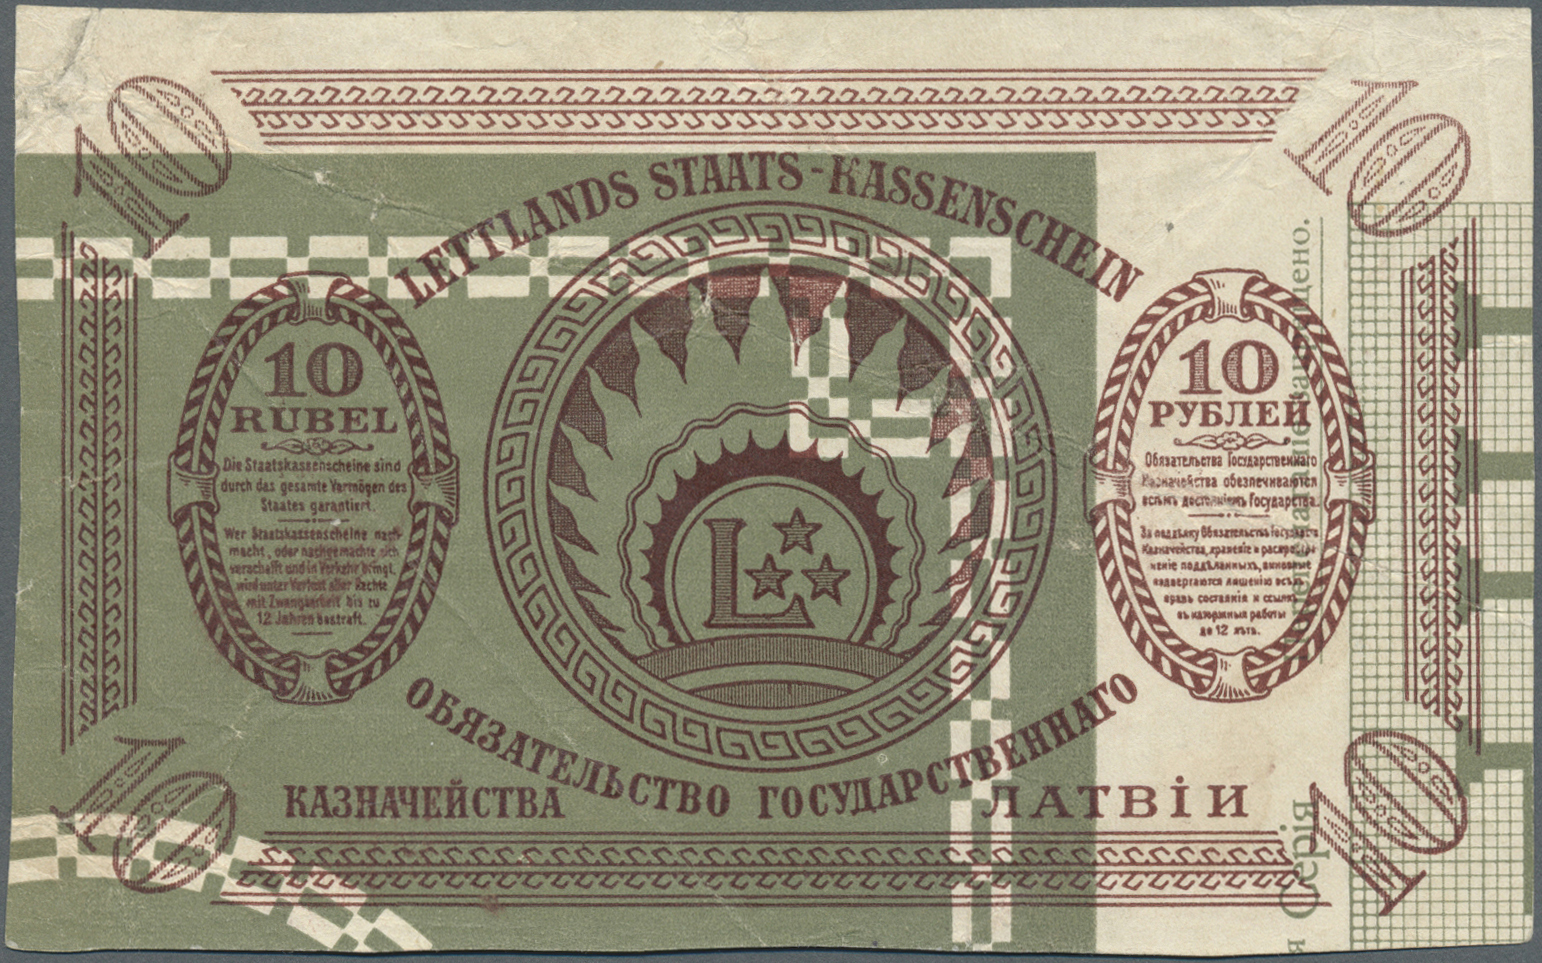 01401 Latvia / Lettland: 10 Rubles Print On Cliche P. 4p, Used With Several Folds And Creases In Paper, Condition: F. - Latvia